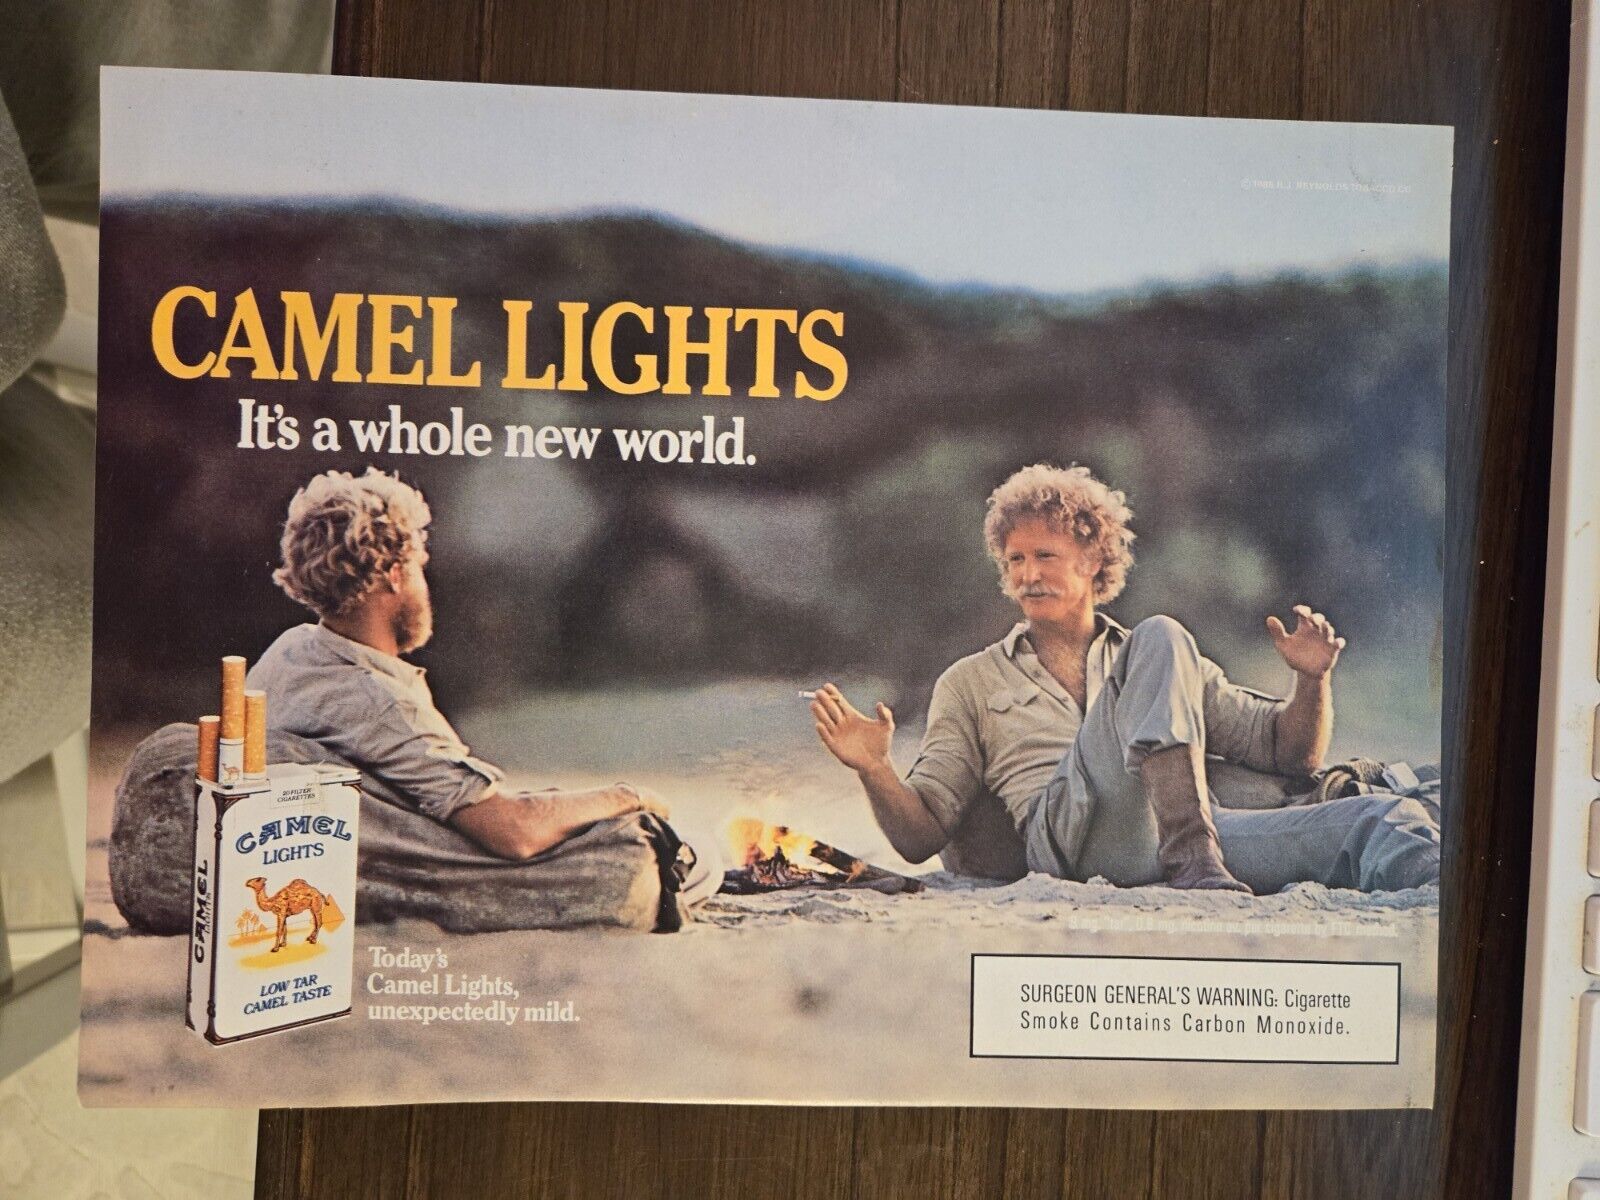 1986 CAMEL LIGHTS IT\'S A WHOLE NEW WORLD PRINT AD POSTER BAR DECOR MAN CAVE 🔥 